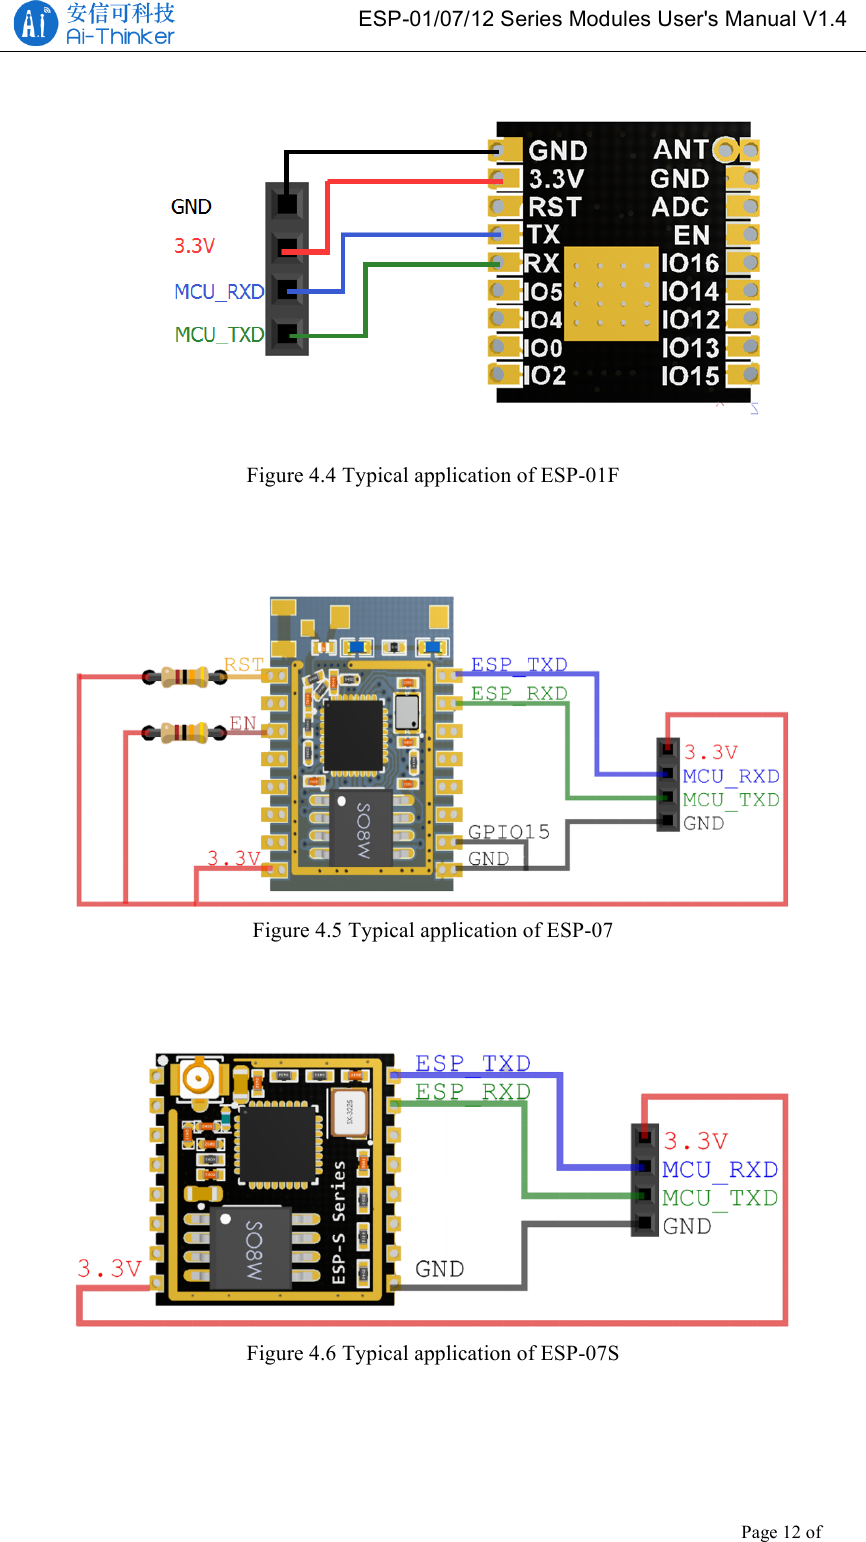   ESP-01/07/12 Series Modules User&apos;s Manual V1.4 Copyright © 2017 Shenzhen Ai-Thinker Technology Co., Ltd All Rights Reserved Page 12 of 23    Figure 4.4 Typical application of ESP-01F     Figure 4.5 Typical application of ESP-07     Figure 4.6 Typical application of ESP-07S 